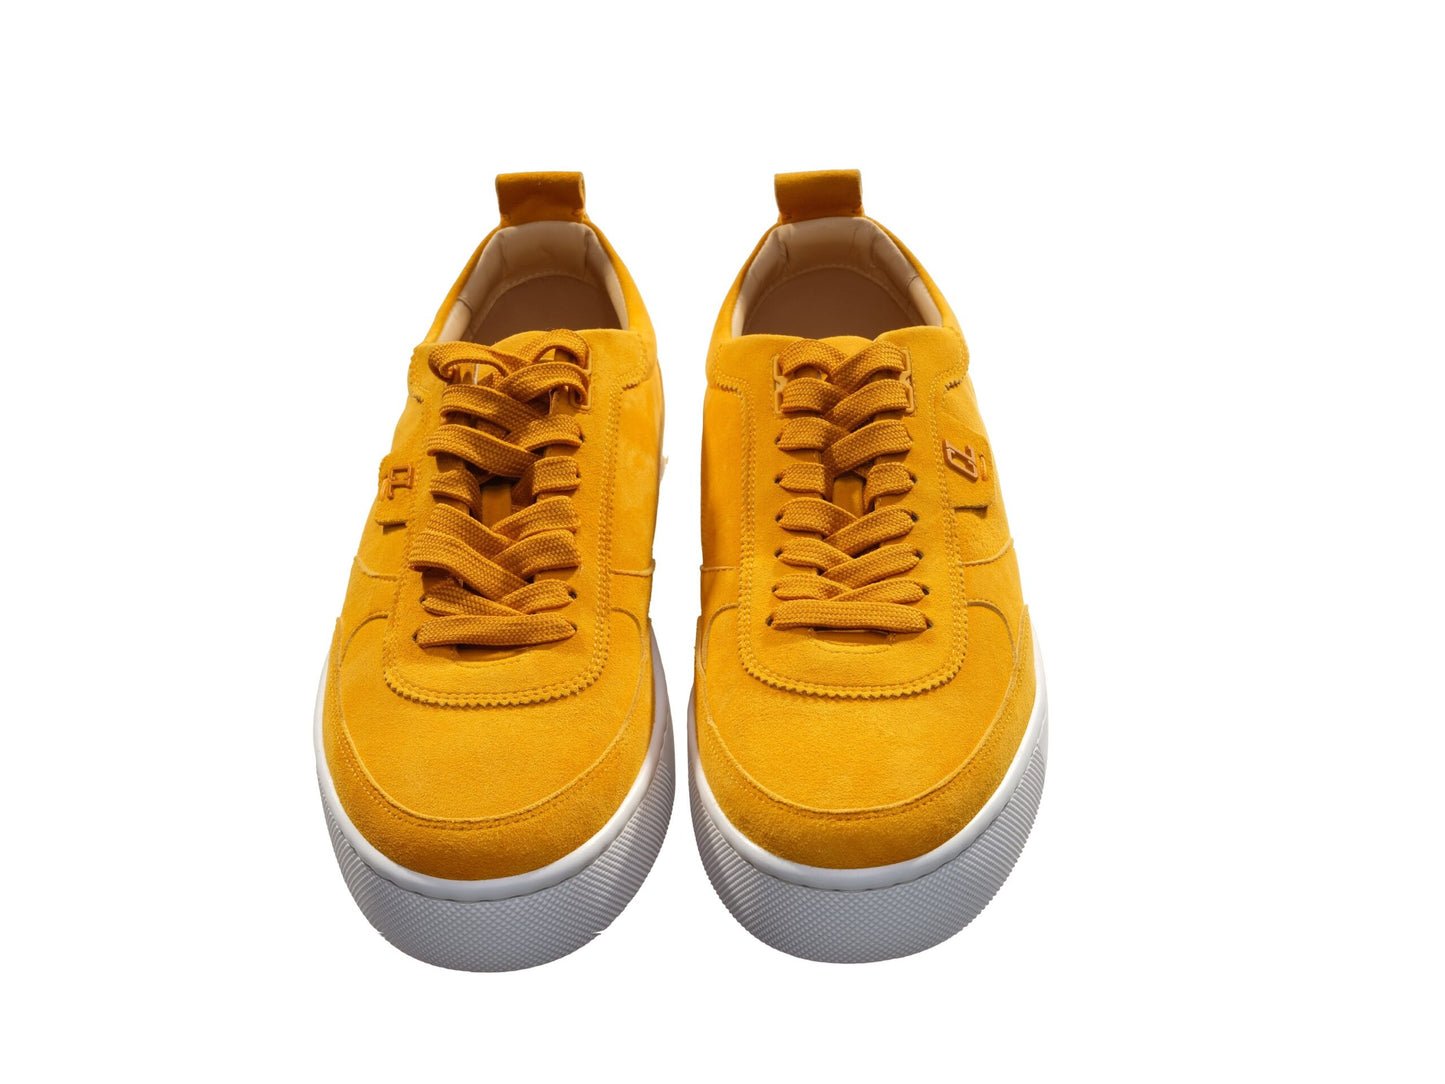 Happyrui Flat Yellow Suede Laceup Sneakers